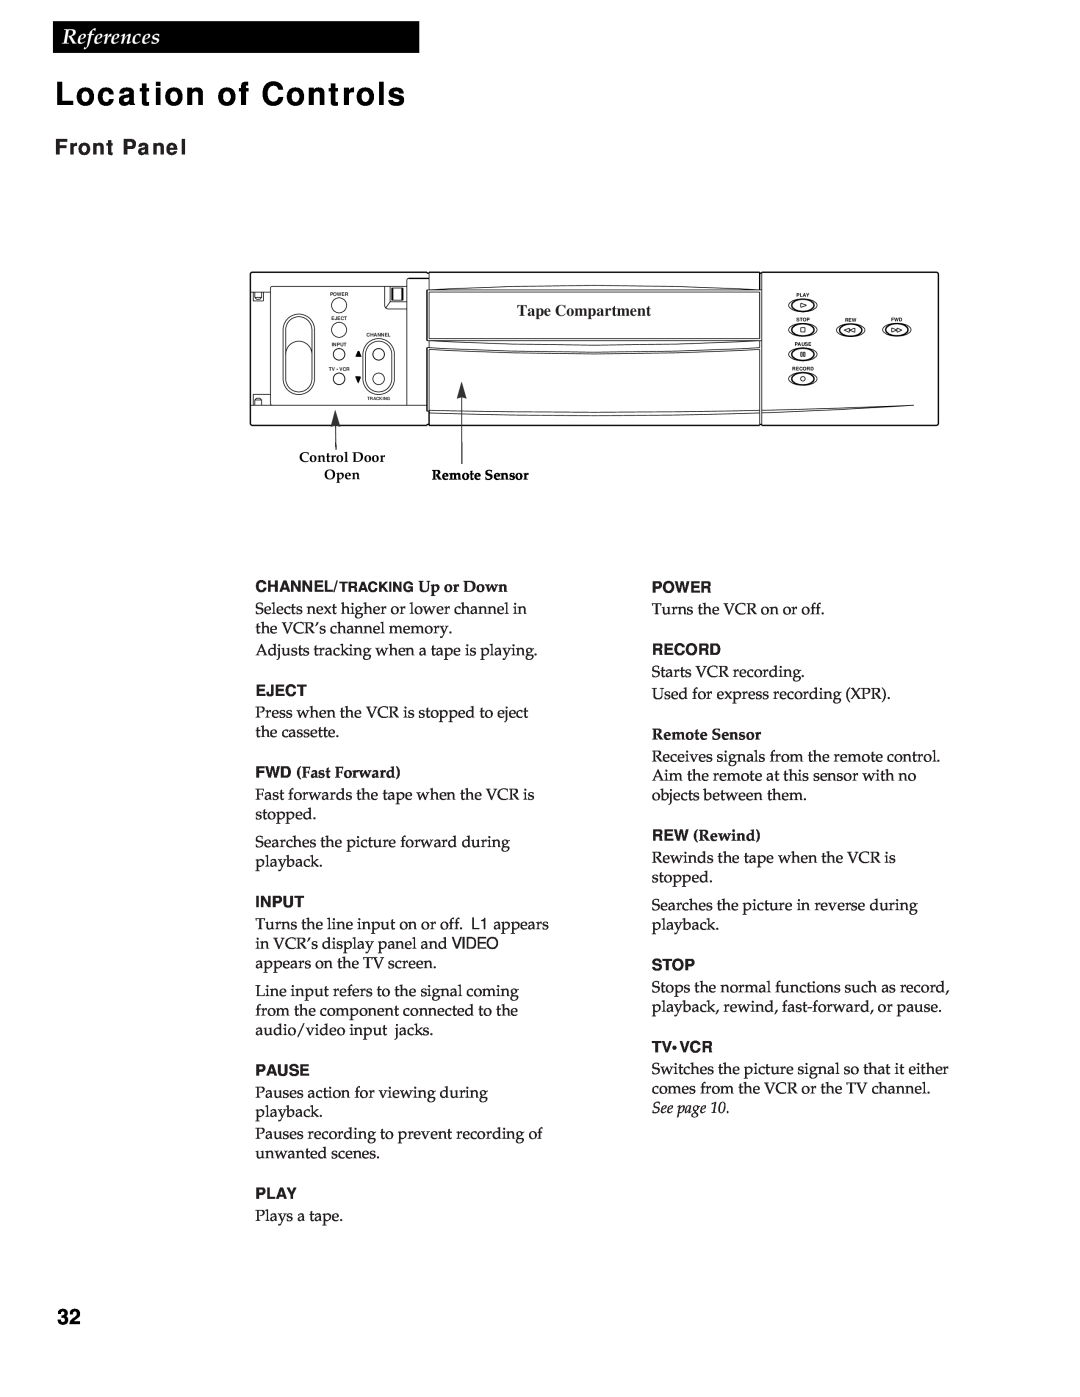 RCA VR618HF manual Location of Controls, Front Panel, References, Eject, Input, Pause, Play, Power, Record, Stop, Tv Vcr 